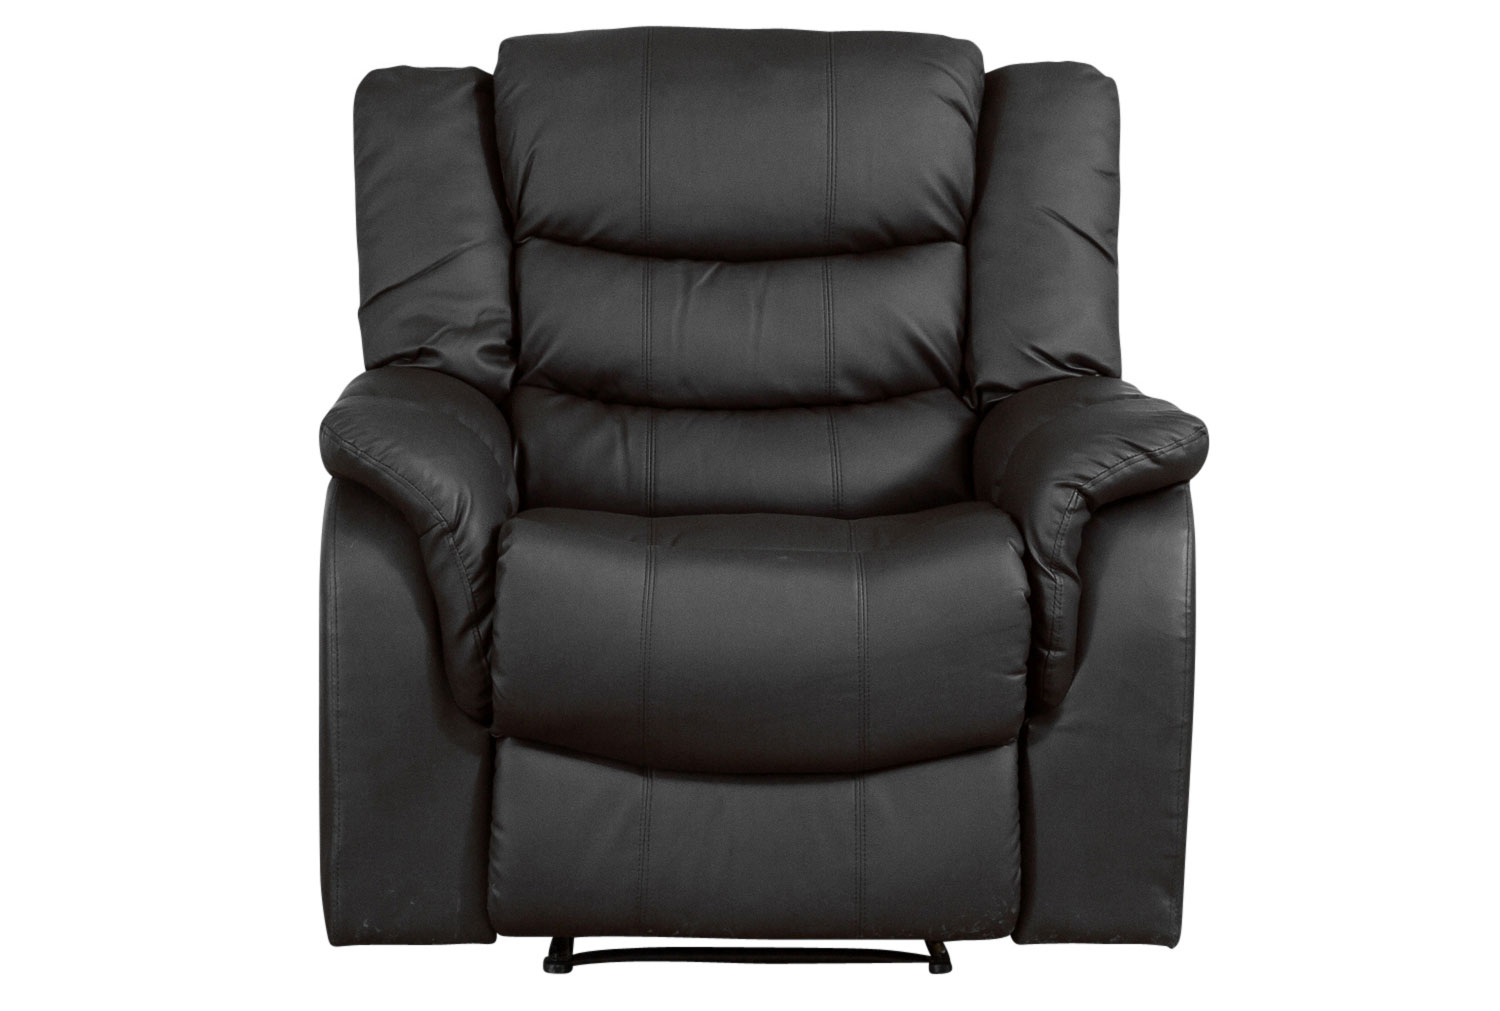 Hunter Leather Recliner Office ArmOffice Chair (Black), Electric Recliner